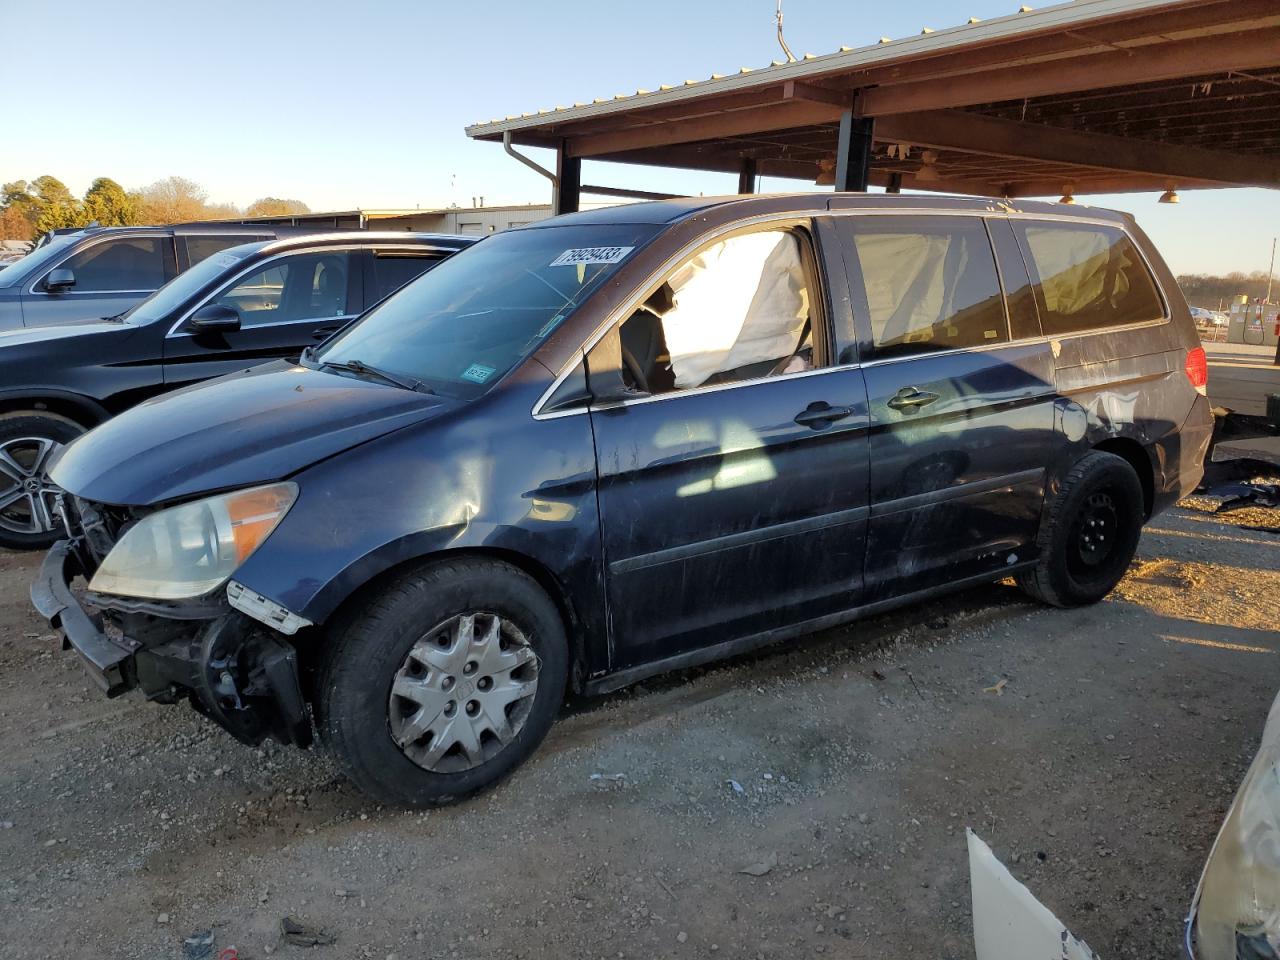 5FNRL38298B****** Salvage and Wrecked 2008 Honda Odyssey in AL - Tanner